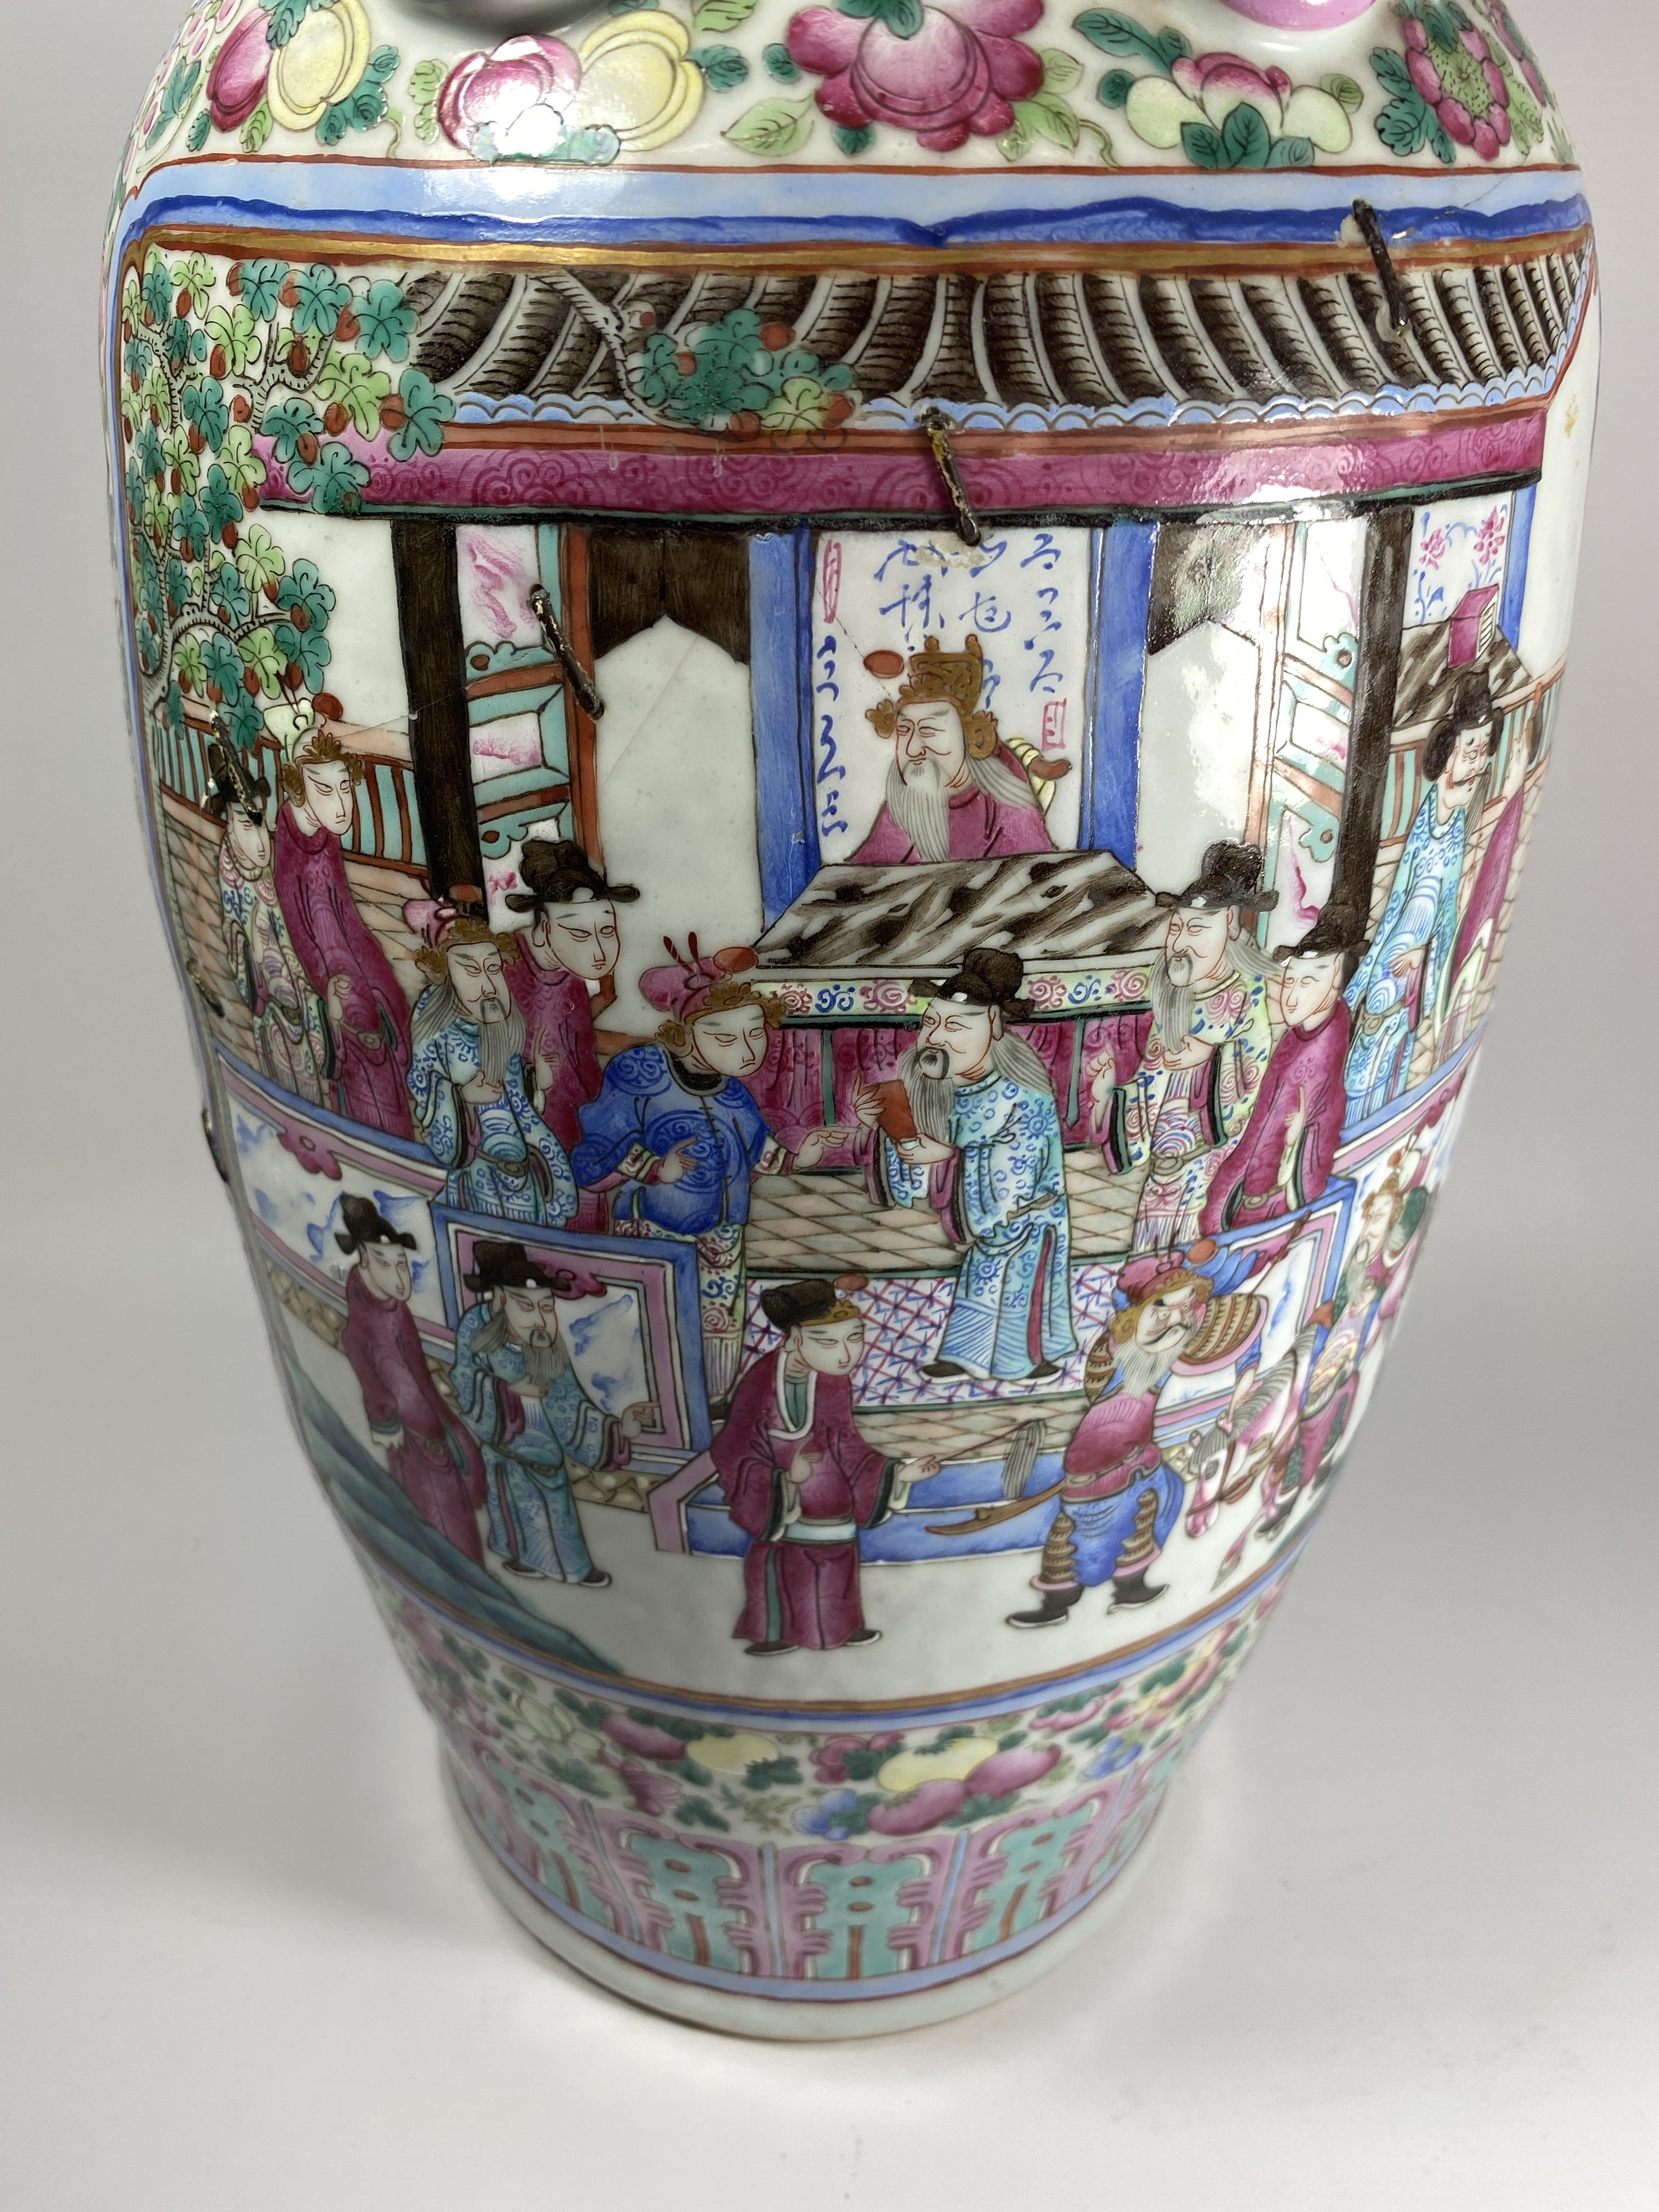 A LARGE MID-LATE 19TH CENTURY CHINESE FLOOR VASE WITH CEREMONIAL DESIGN PANELS, HEIGHT 63CM, (A/F) - Image 4 of 8